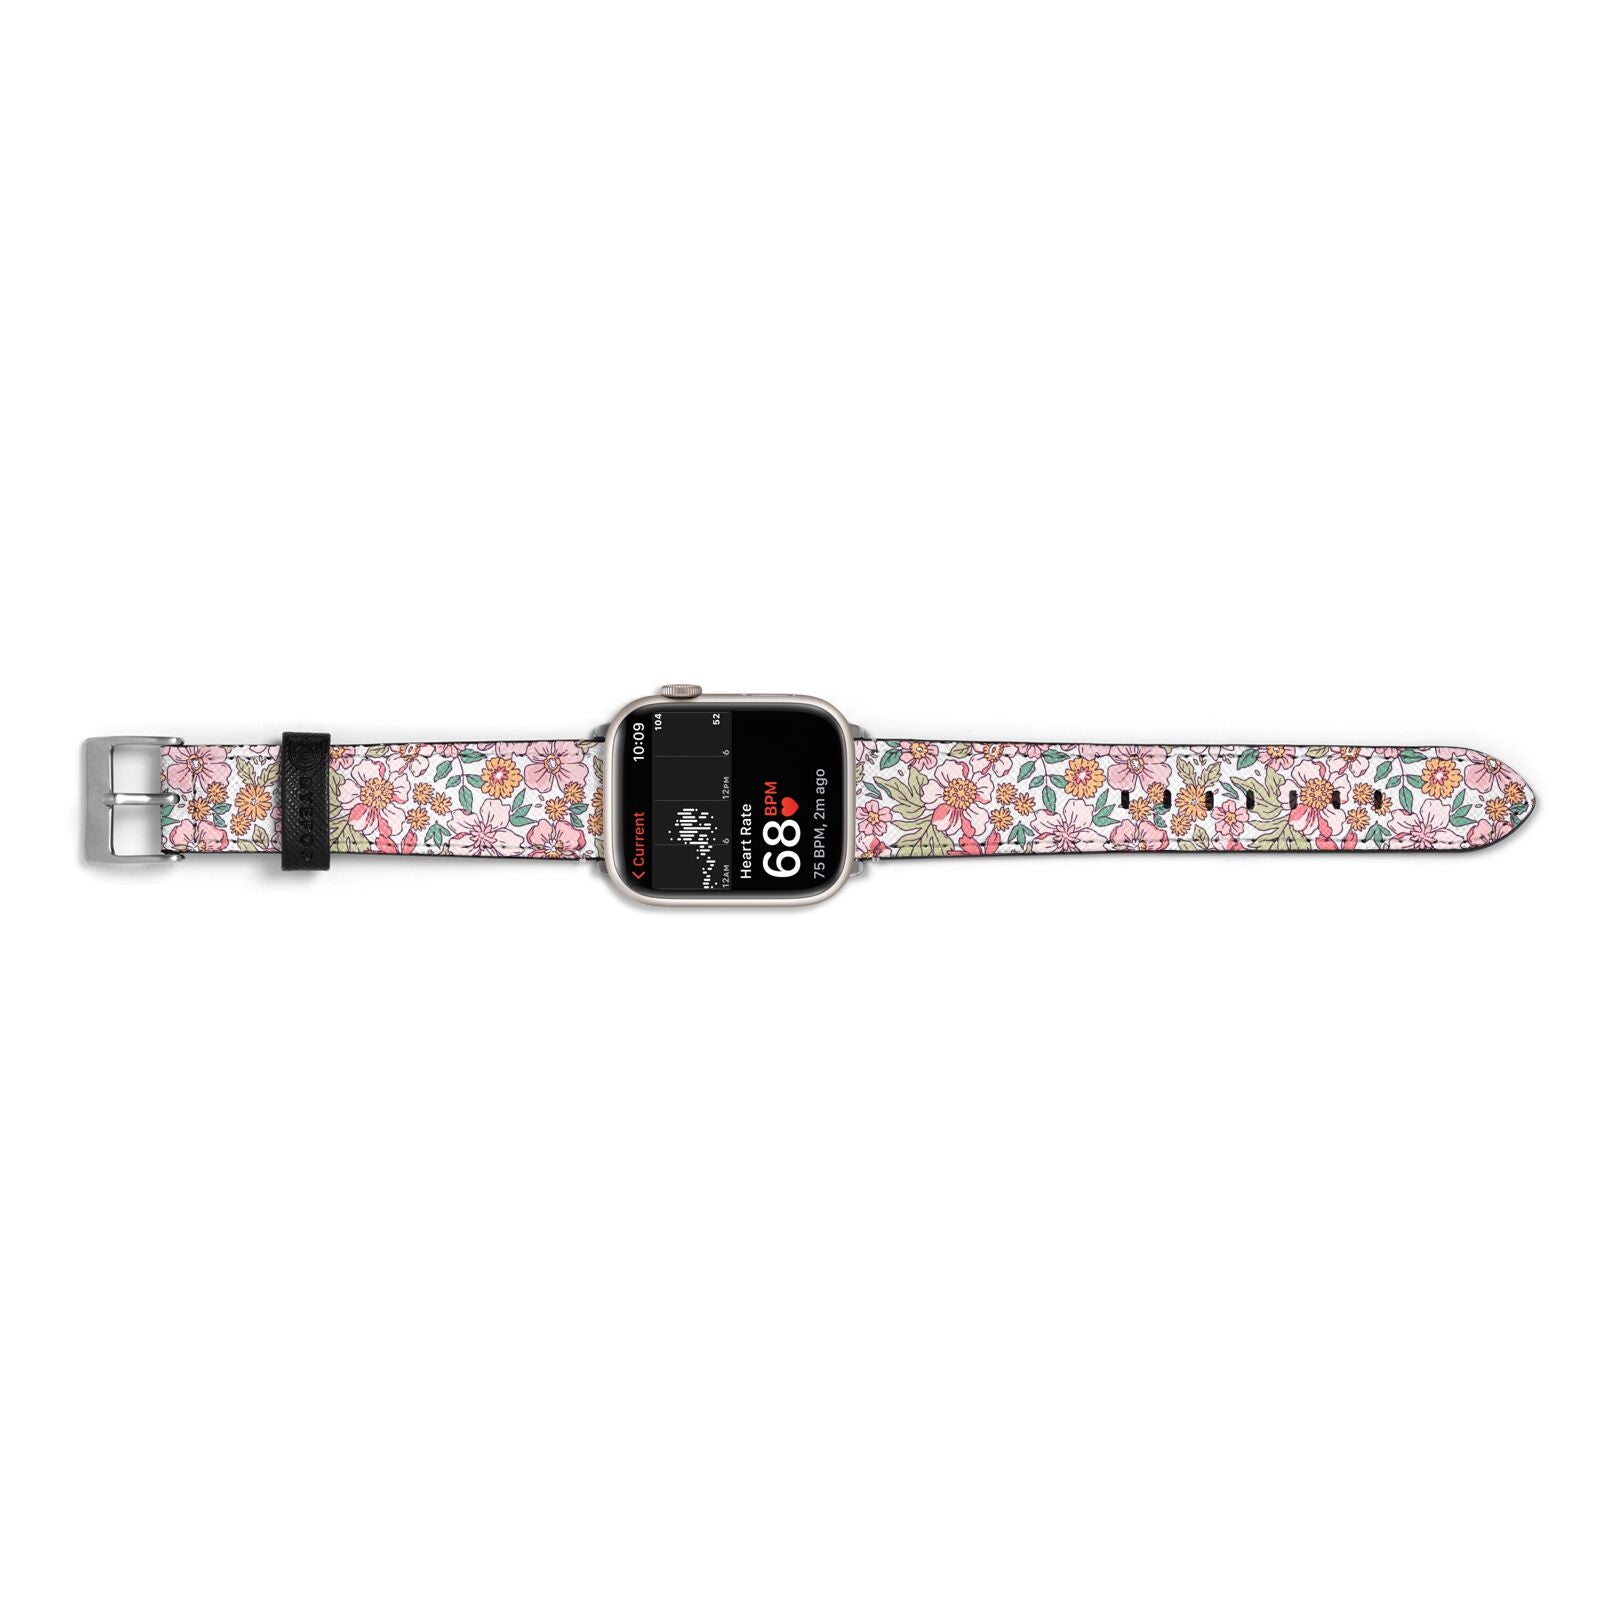 Small Floral Pattern Apple Watch Strap Size 38mm Landscape Image Silver Hardware